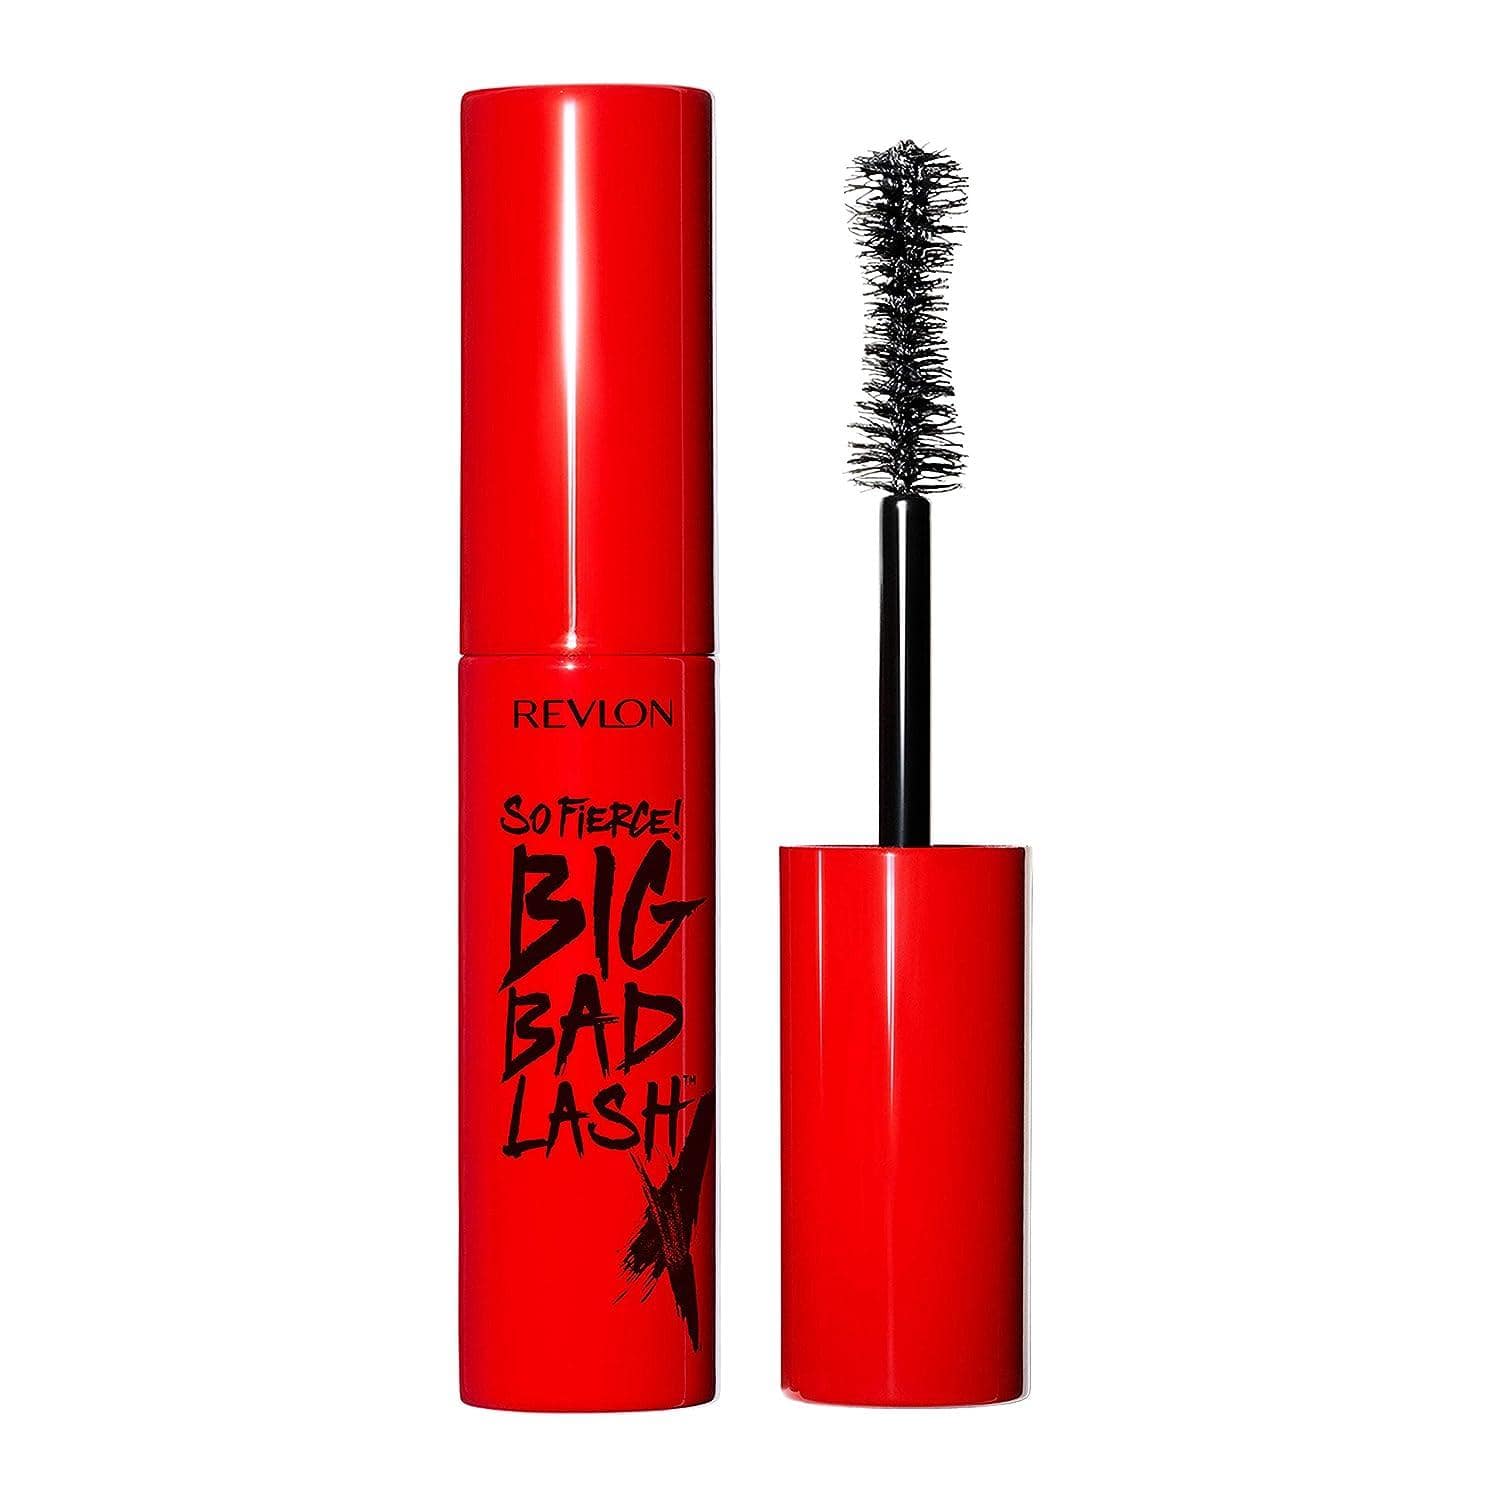 Opting for a flake-free 24-hour formula, my go-to volumizing mascara not only adds impressive volume but also boasts color-depositing technology for a gradual darkening effect on lashes.